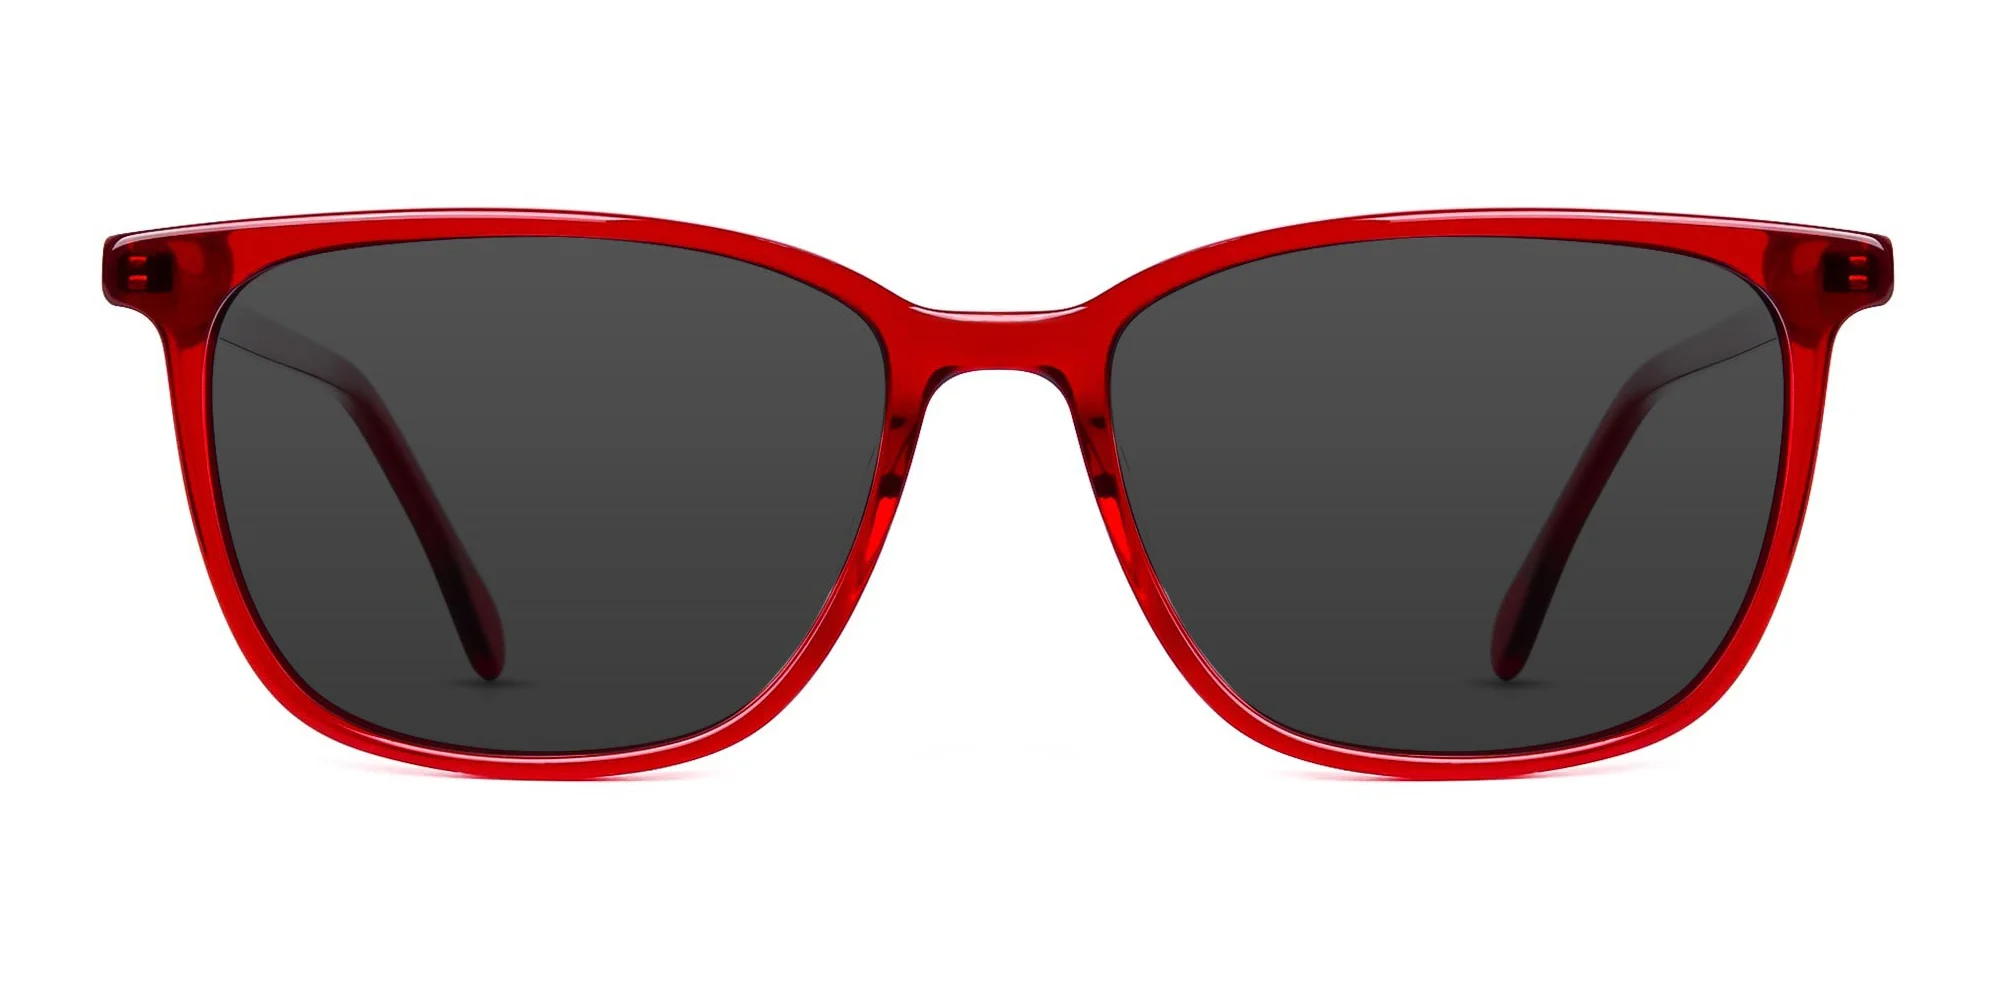 wine-red-square-and-rectangular-grey-tinted-sunglasses-frames-1